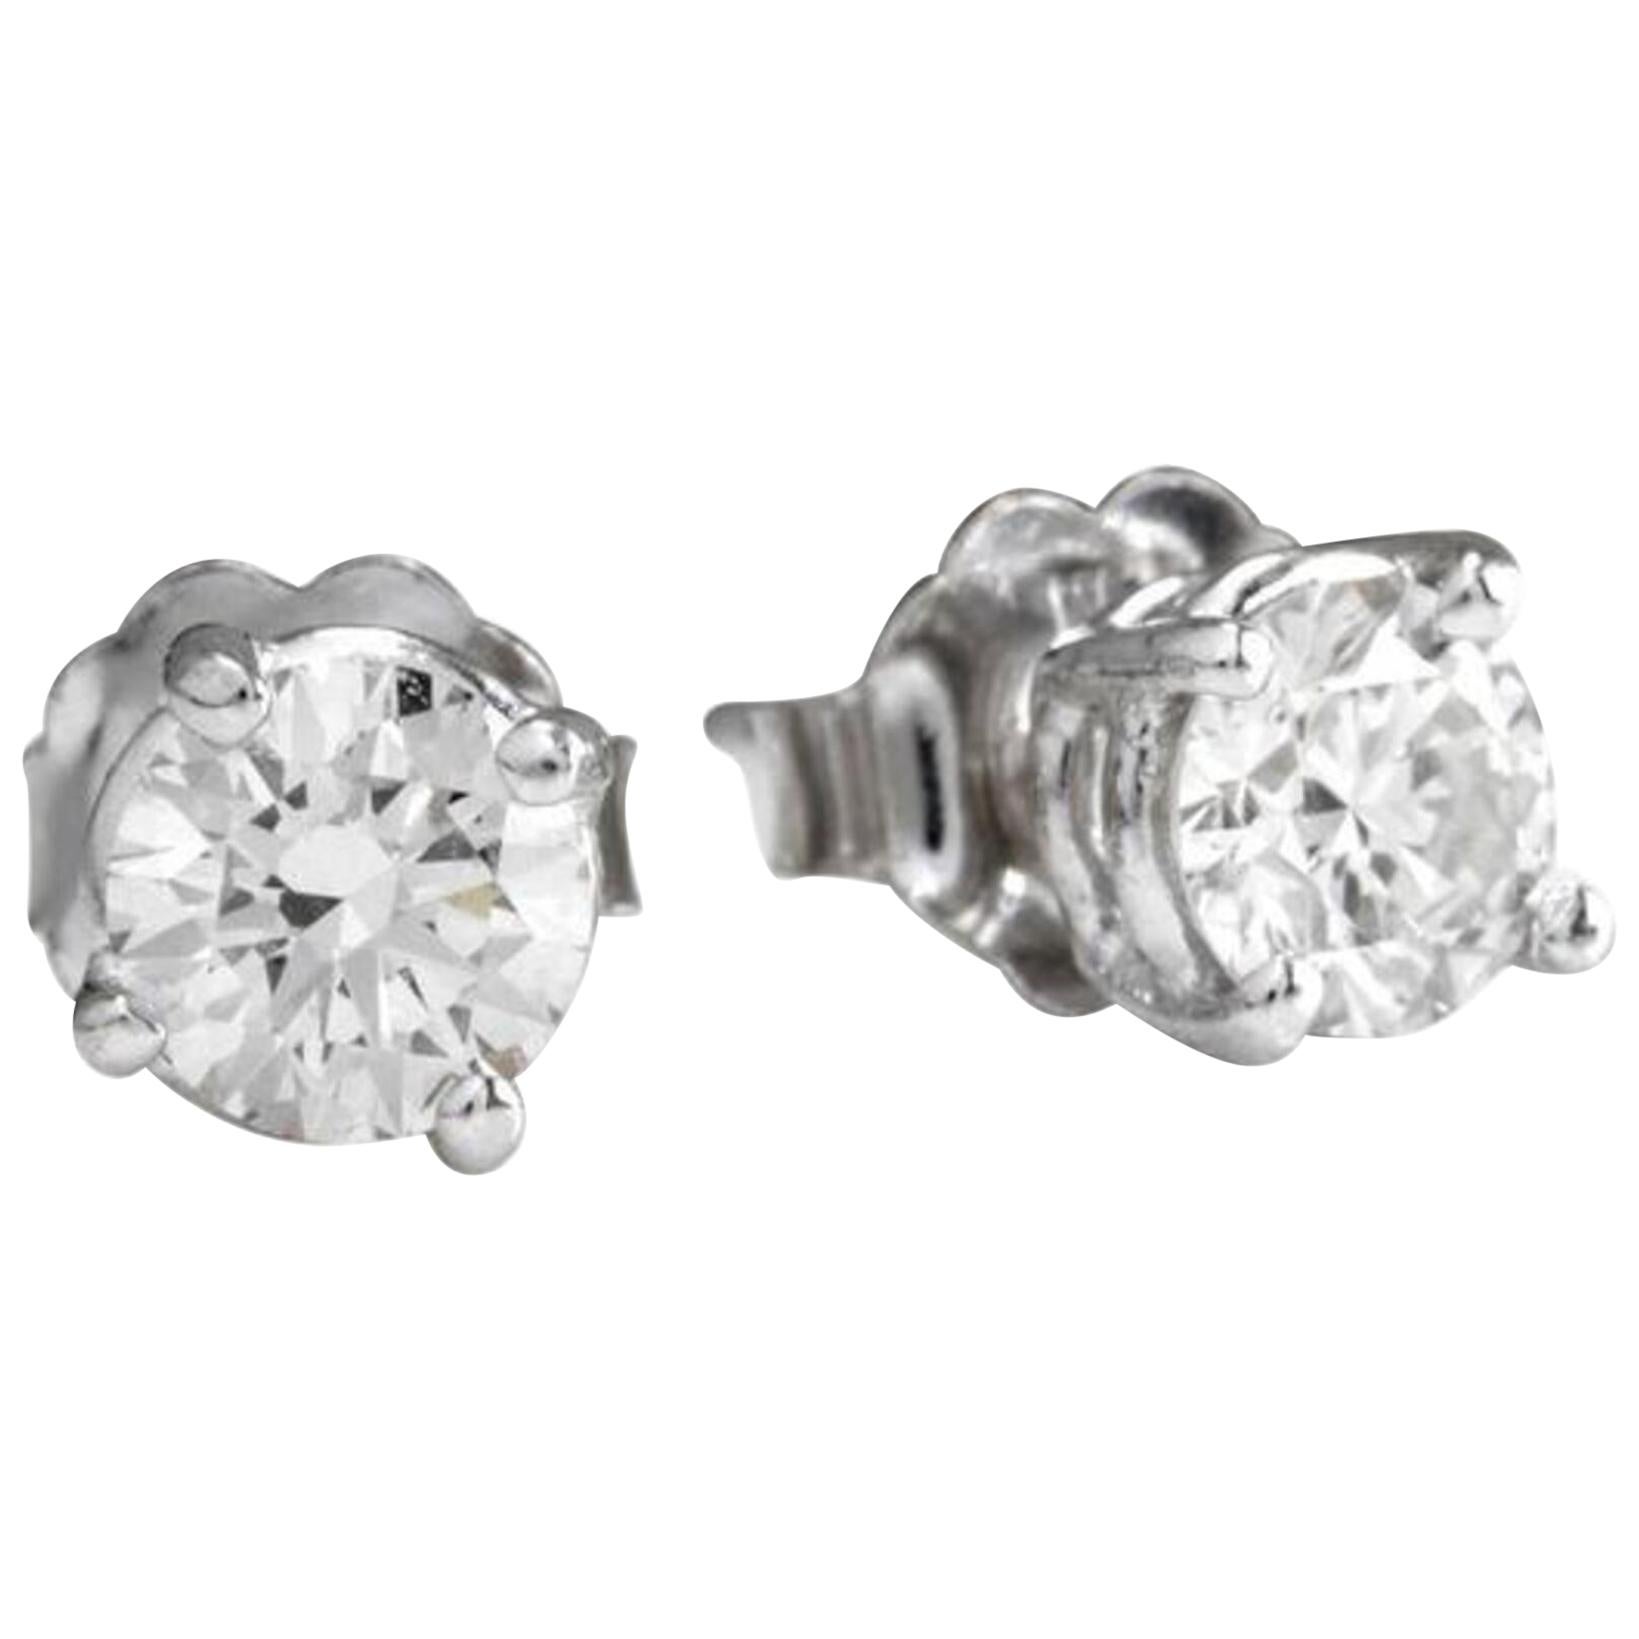 Exquisite 1.80 Carat Natural Diamond 14 Karat Solid White Gold Stud Earrings For Sale